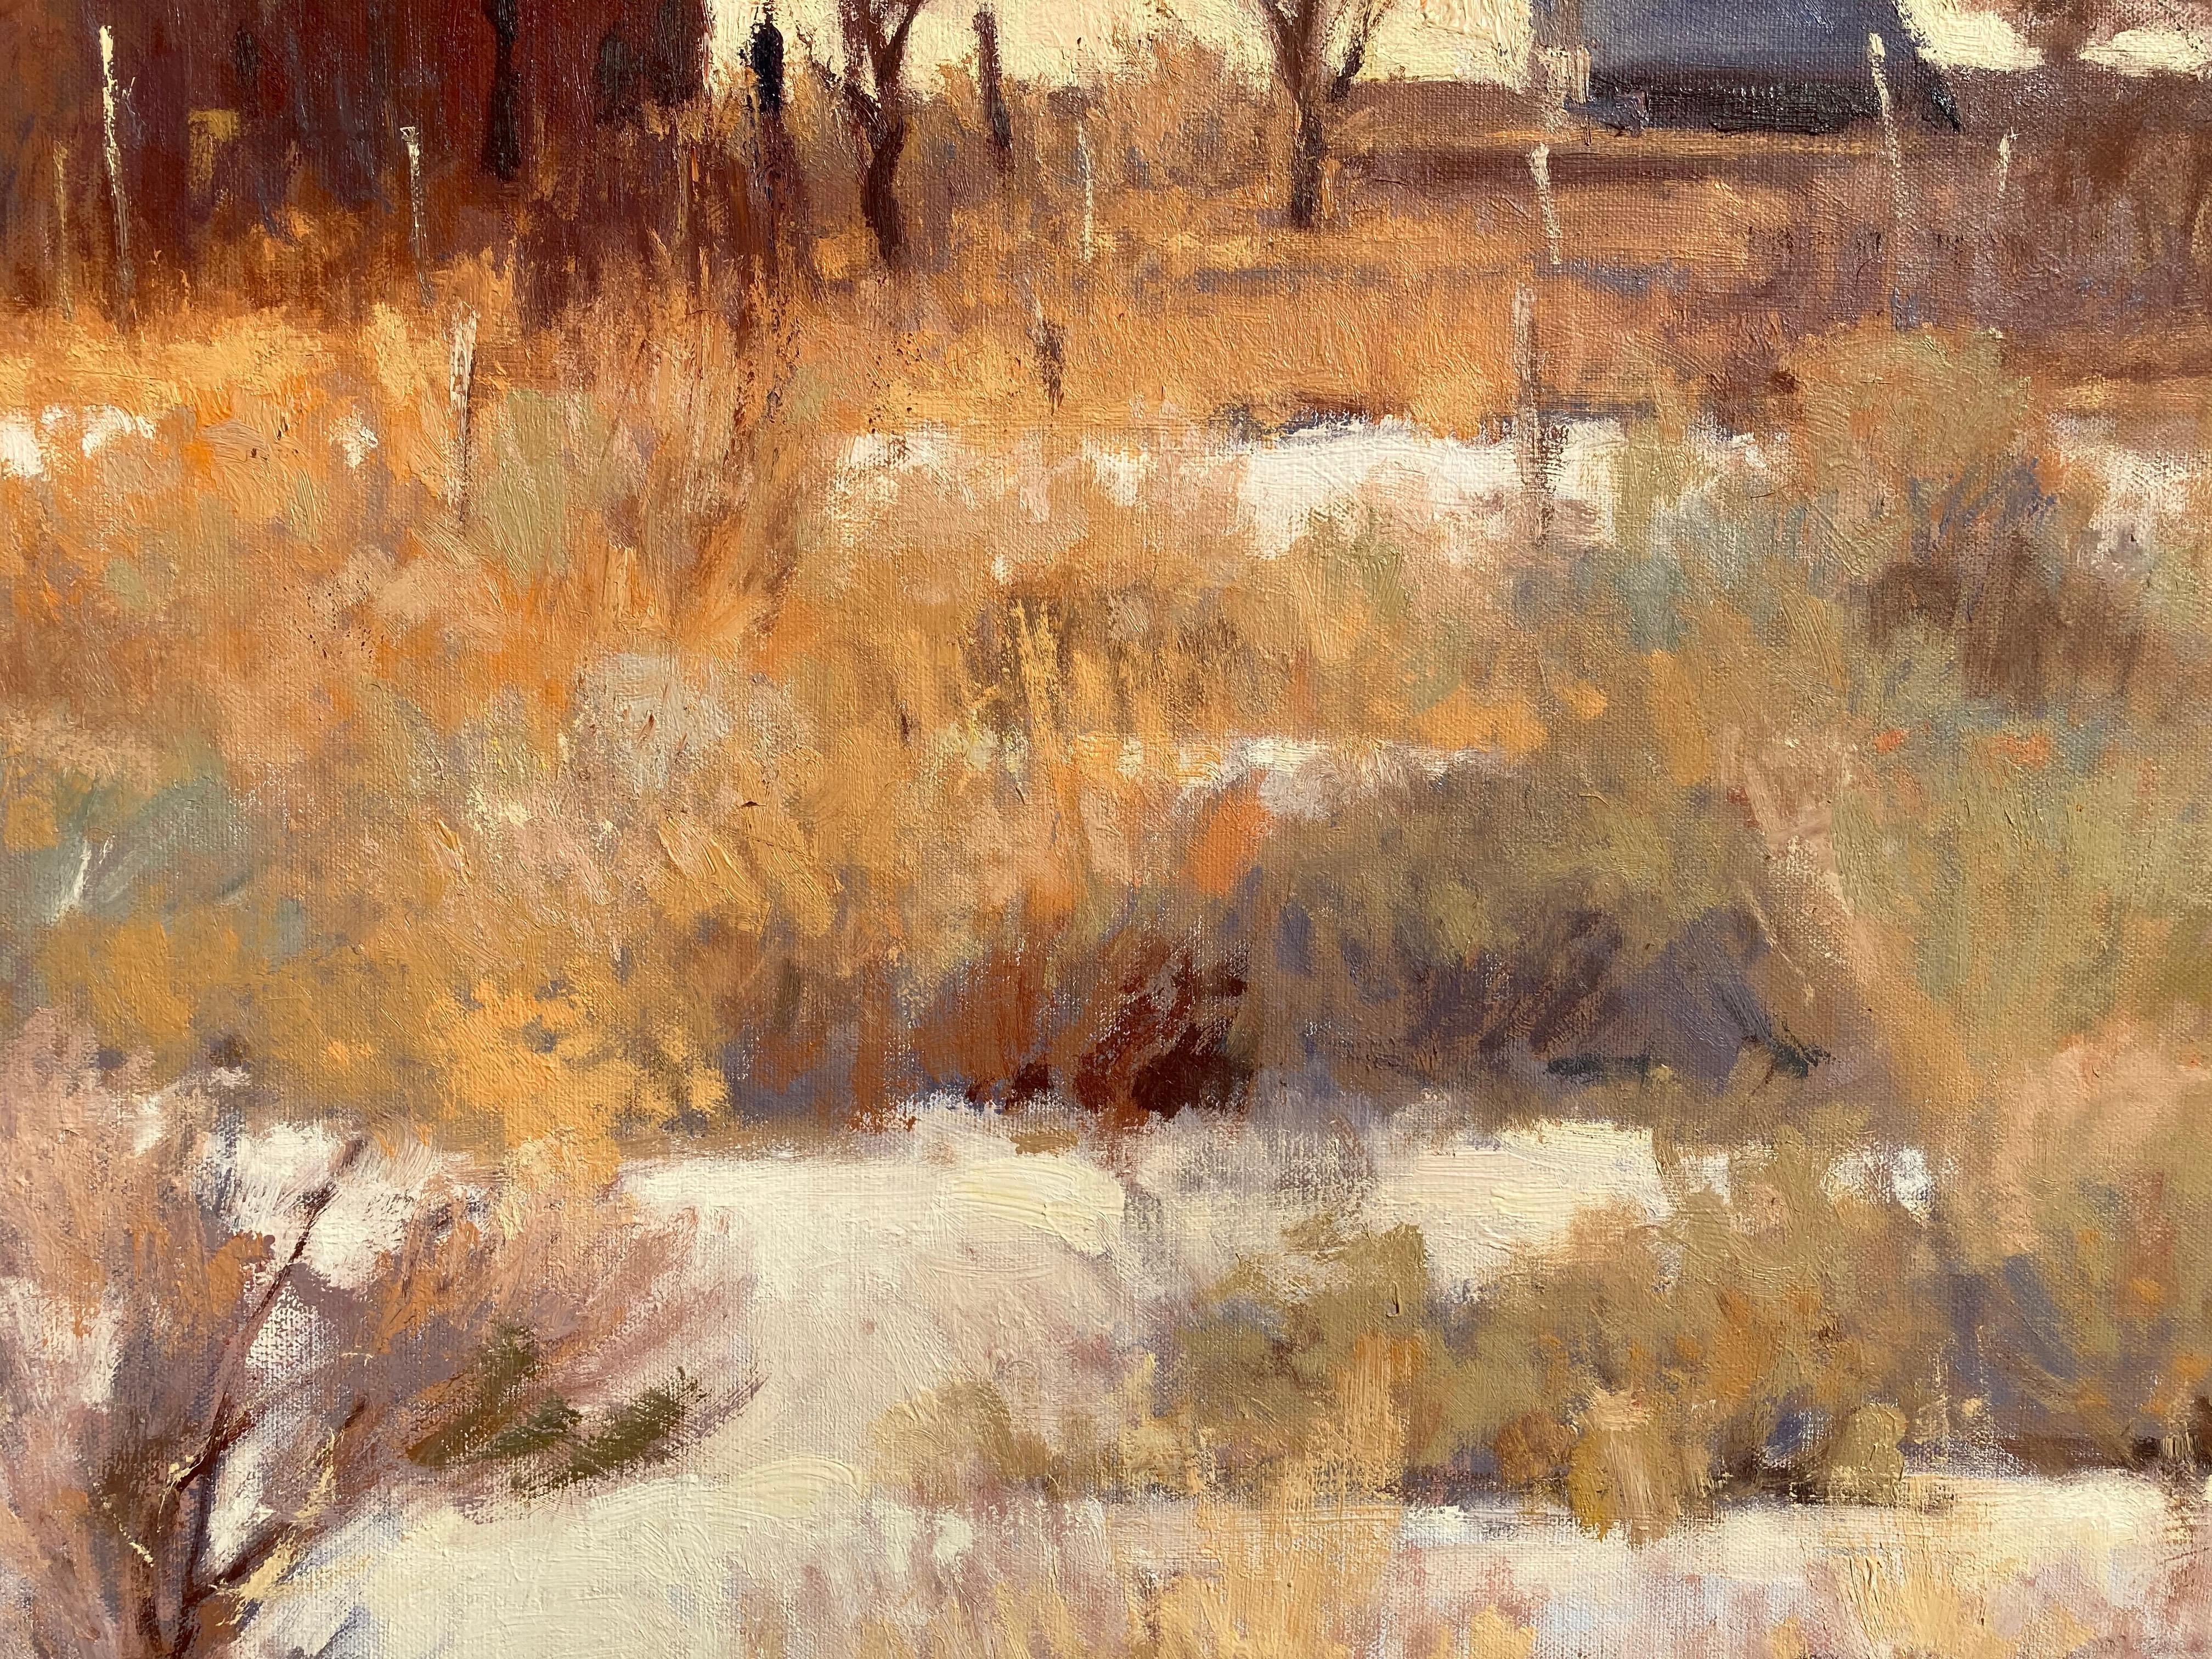 Sunlight and Snow, Taos, New Mexico - Painting by Ray Vinella